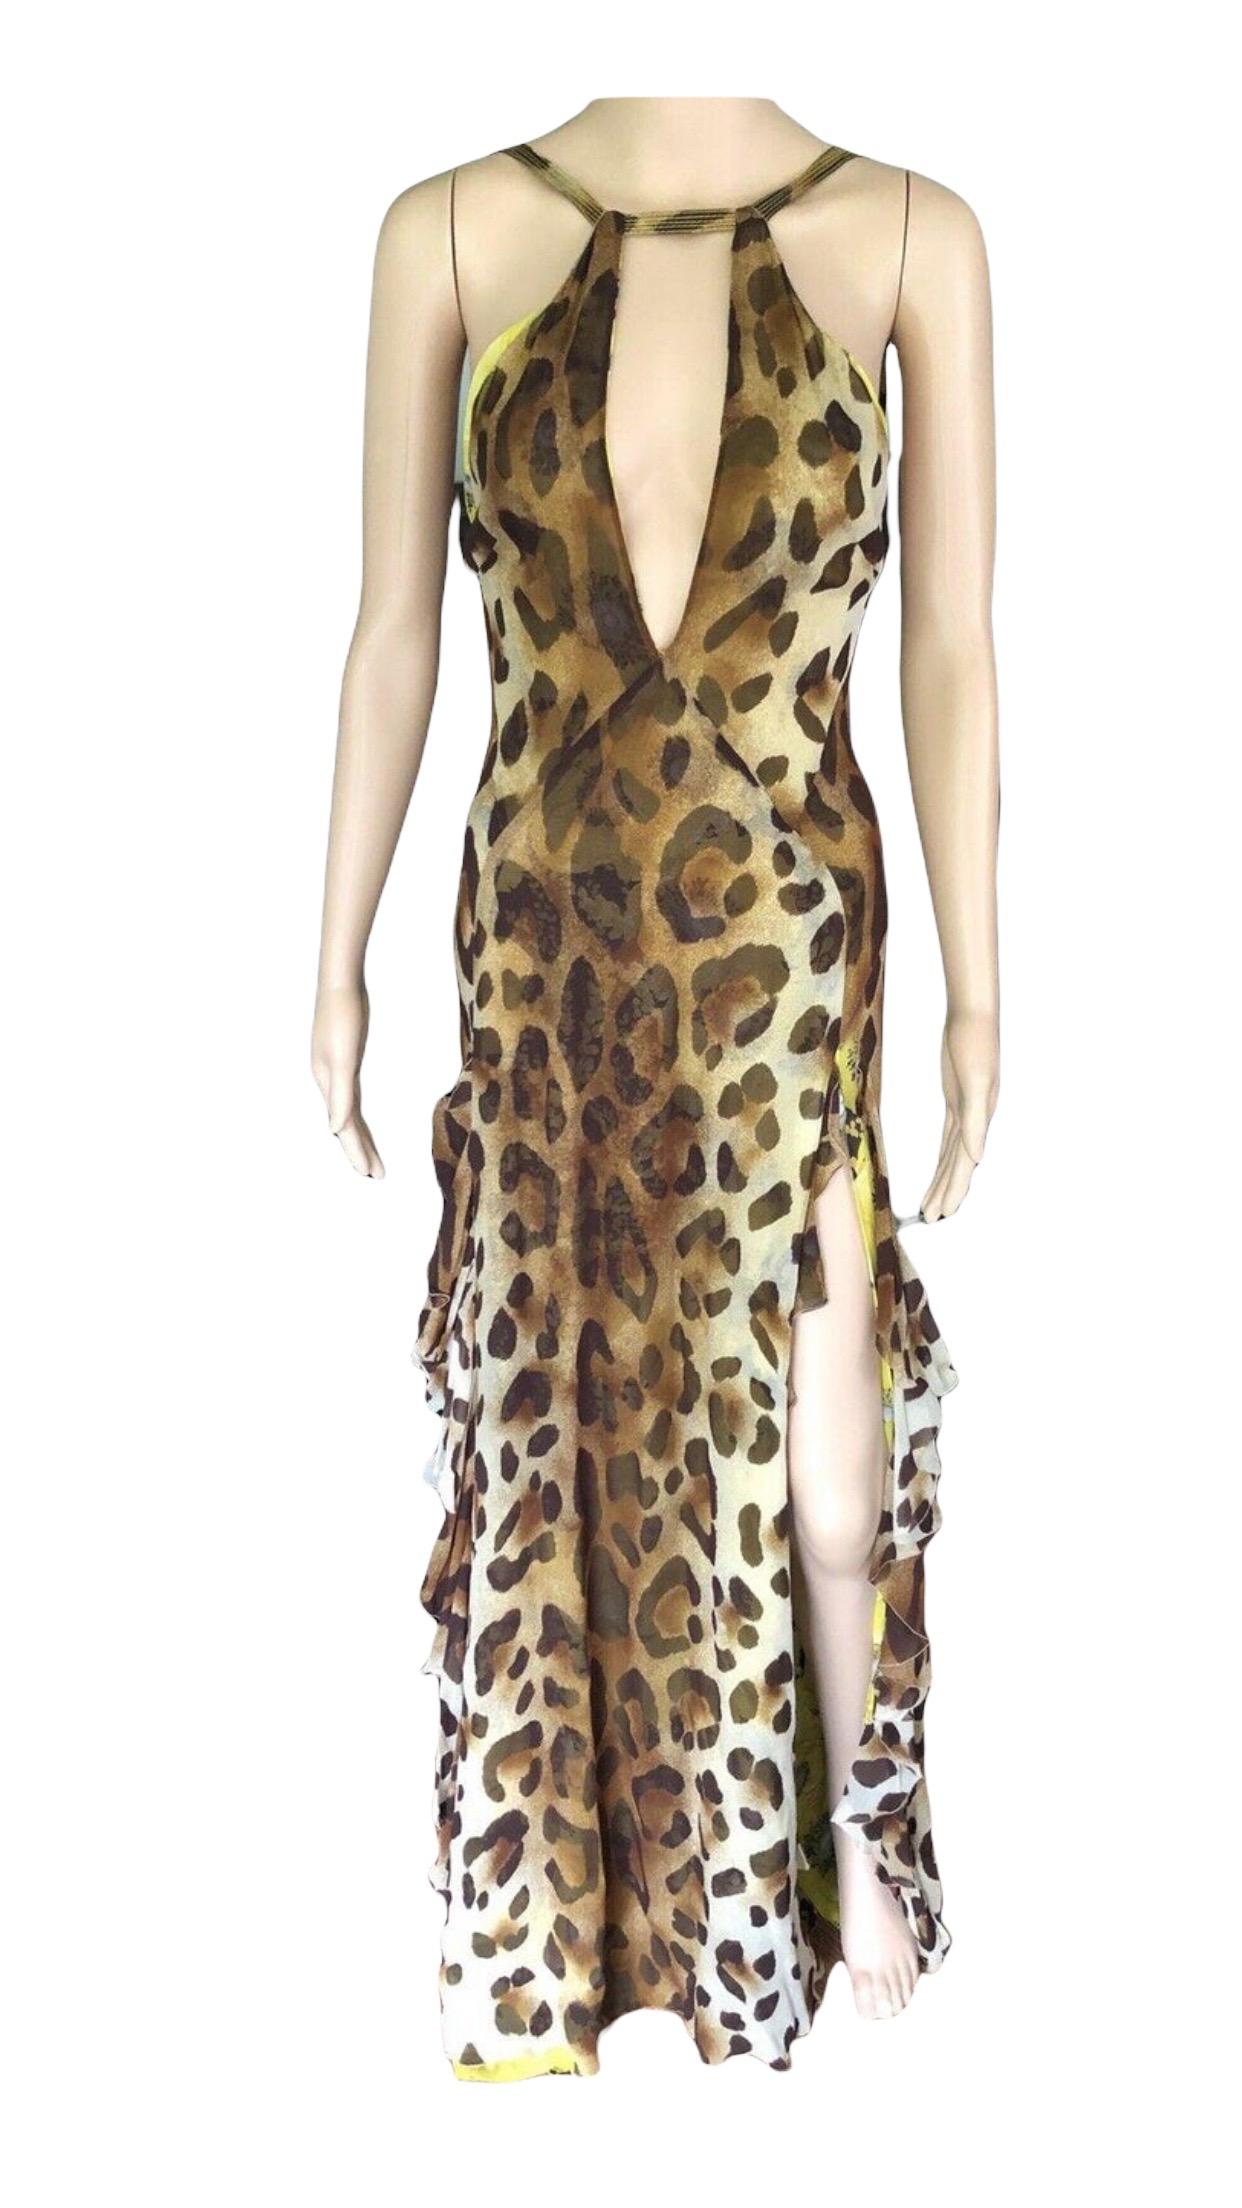 Gianni Versace S/S 2002 Vintage Plunged Backless Dress Gown For Sale 3